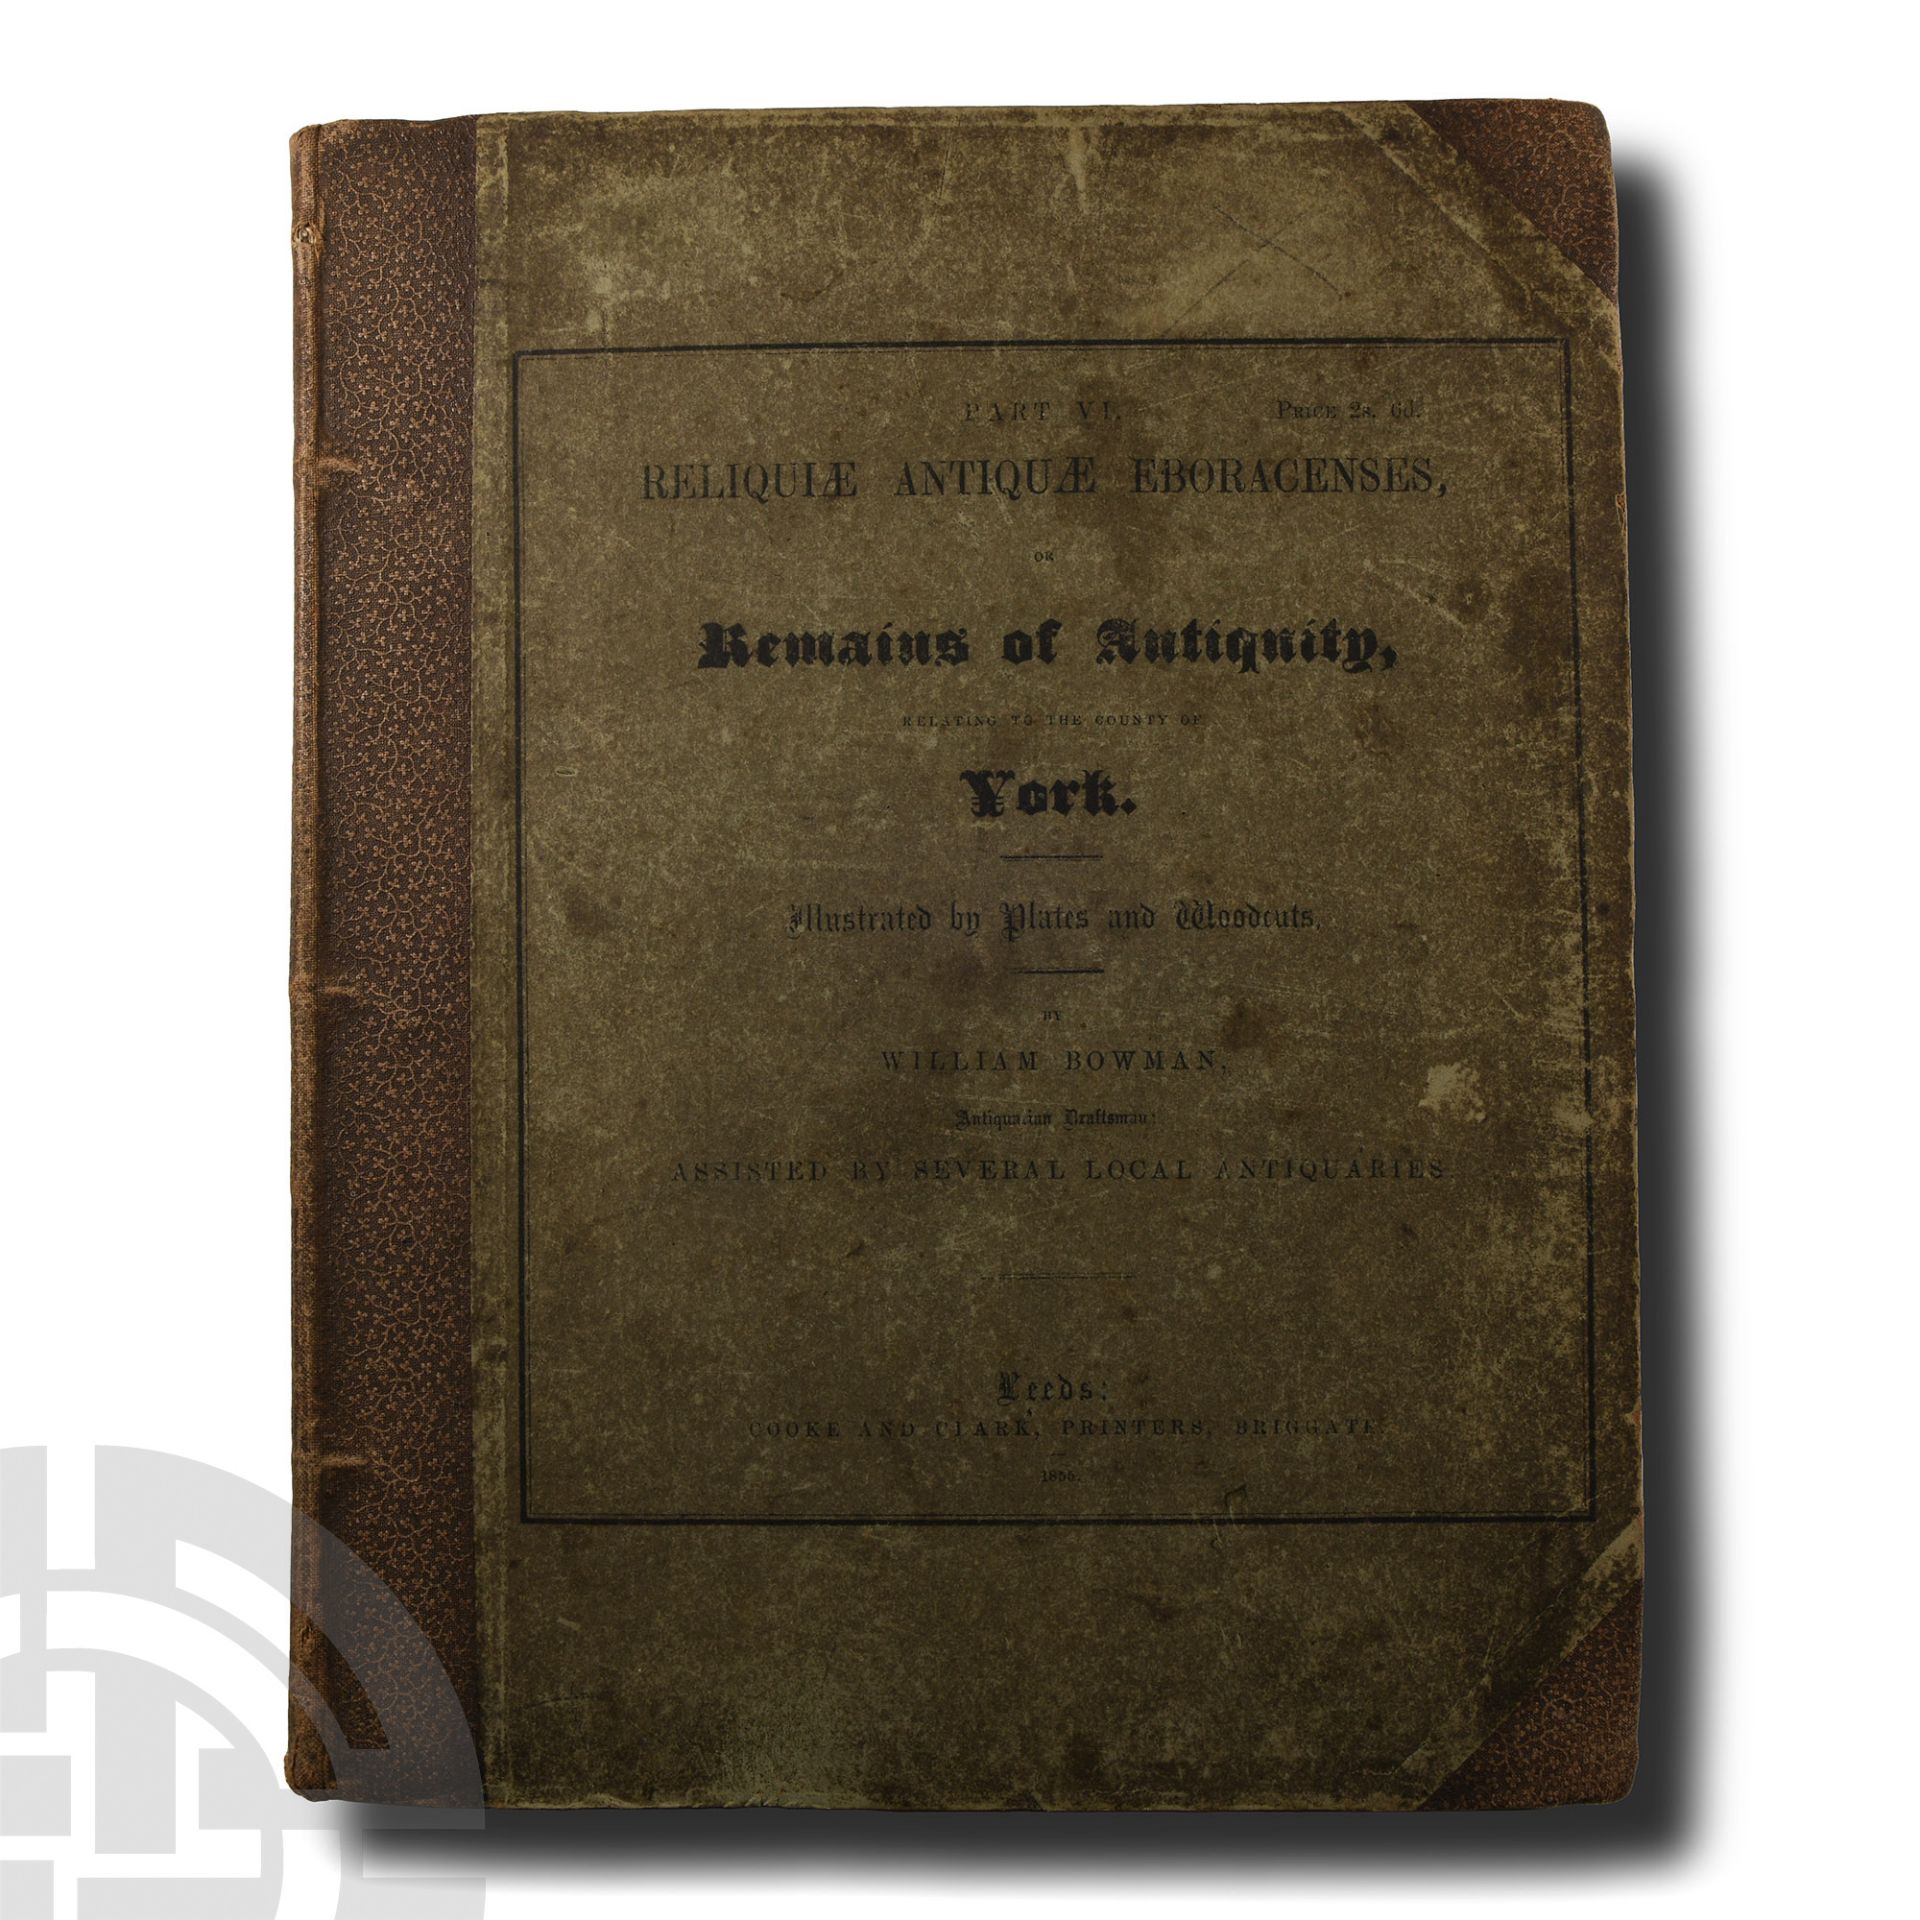 Archaeological Books - Bowman - Remains of Antiquity Relating to the County of York